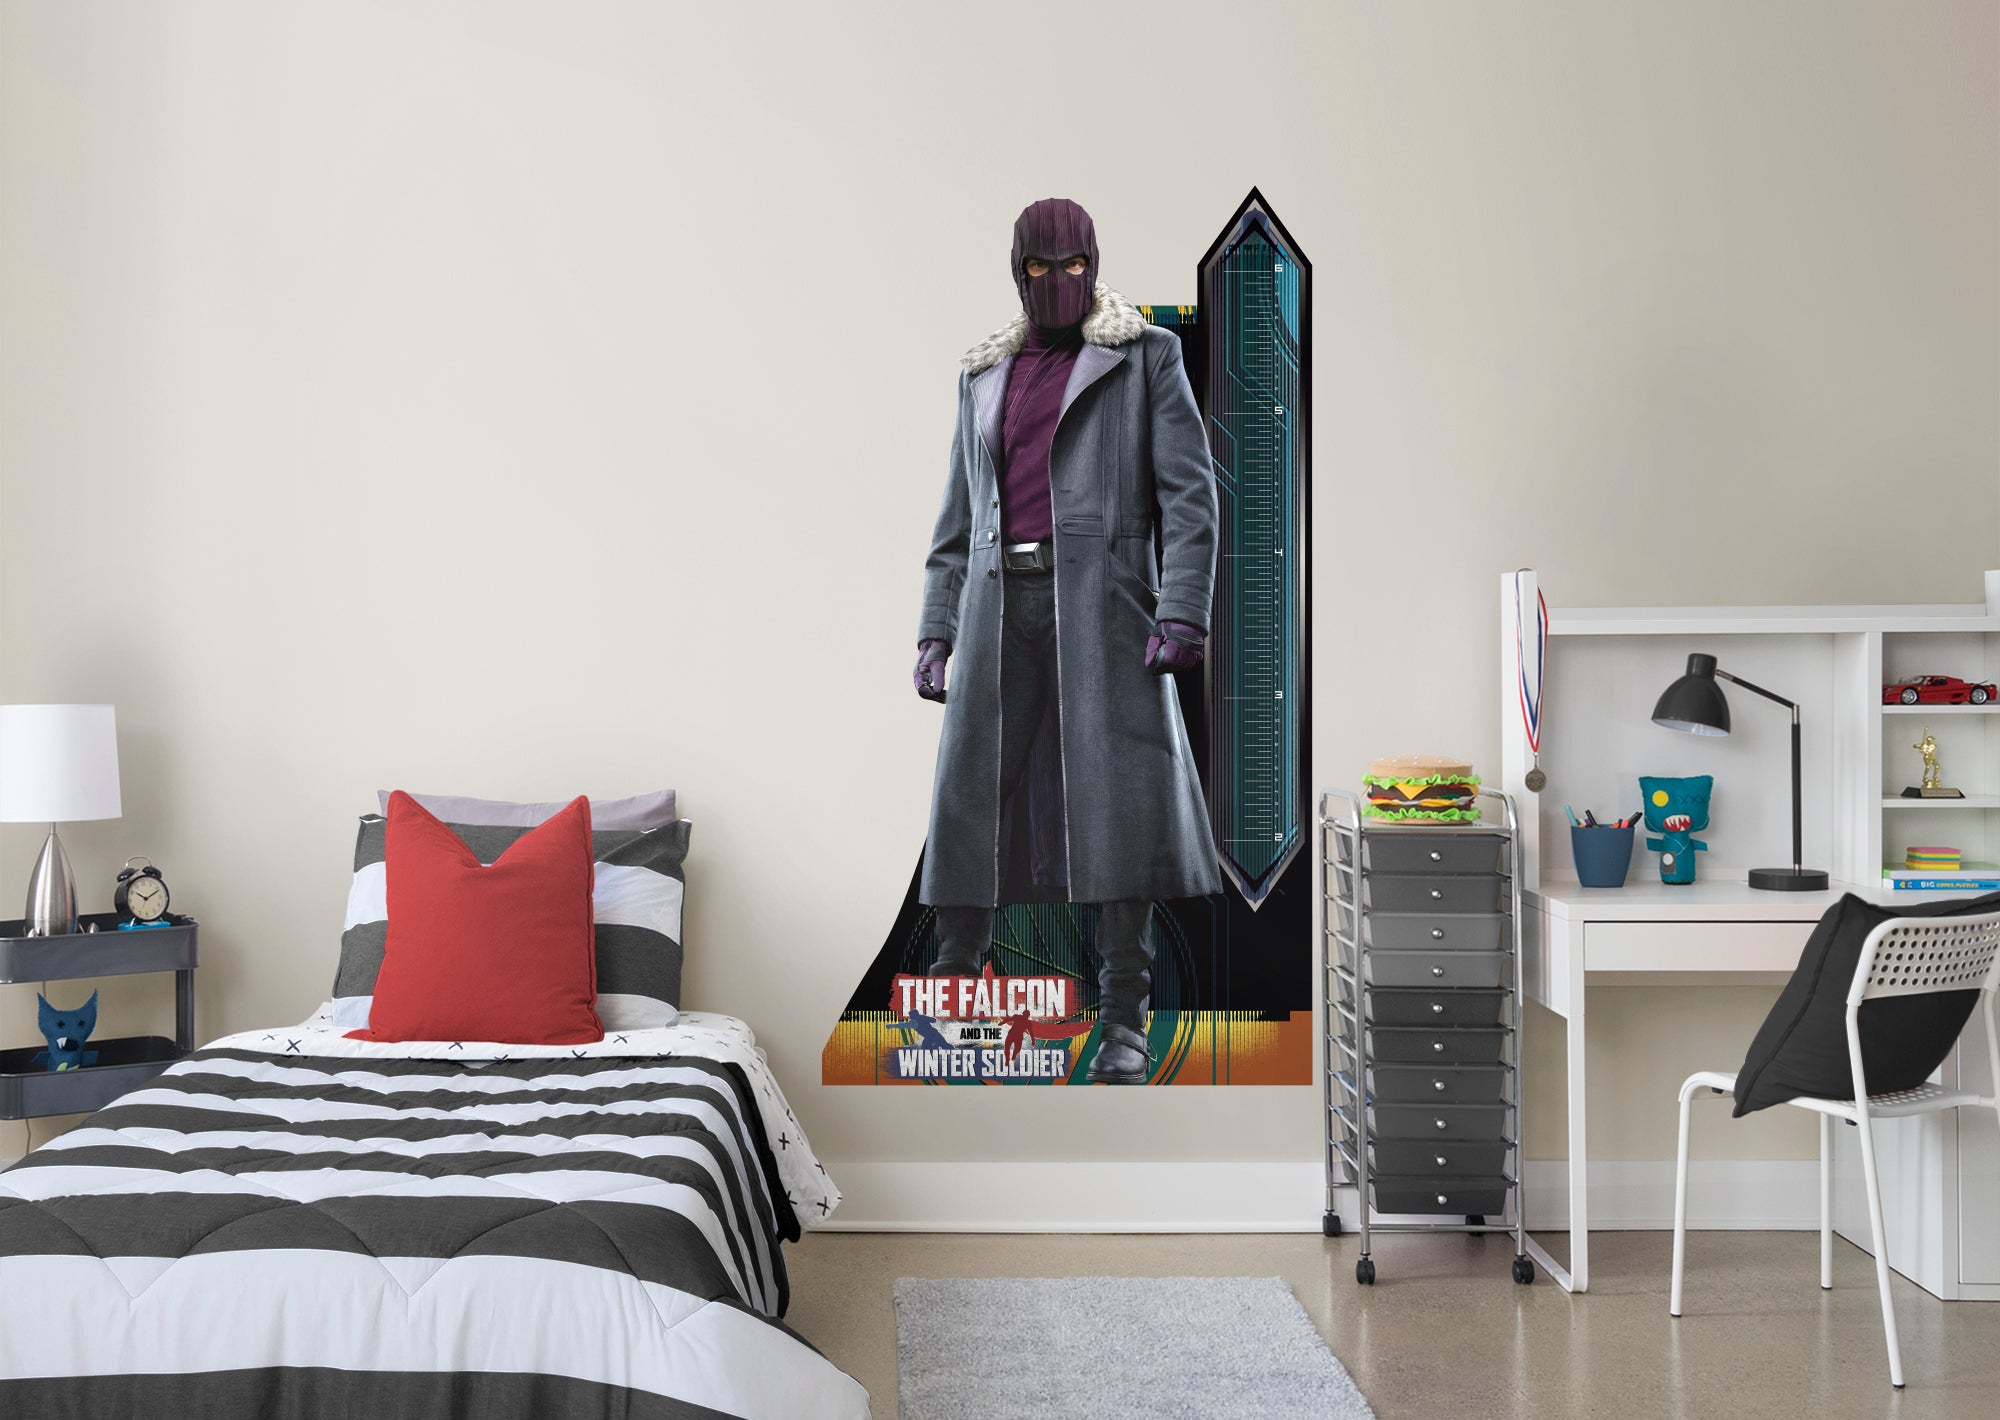 The Falcon & The Winter Soldier Growth Chart BARON ZEMO - Officially Licensed Marvel Removable Wall Decal Growth Chart (75"W x 3